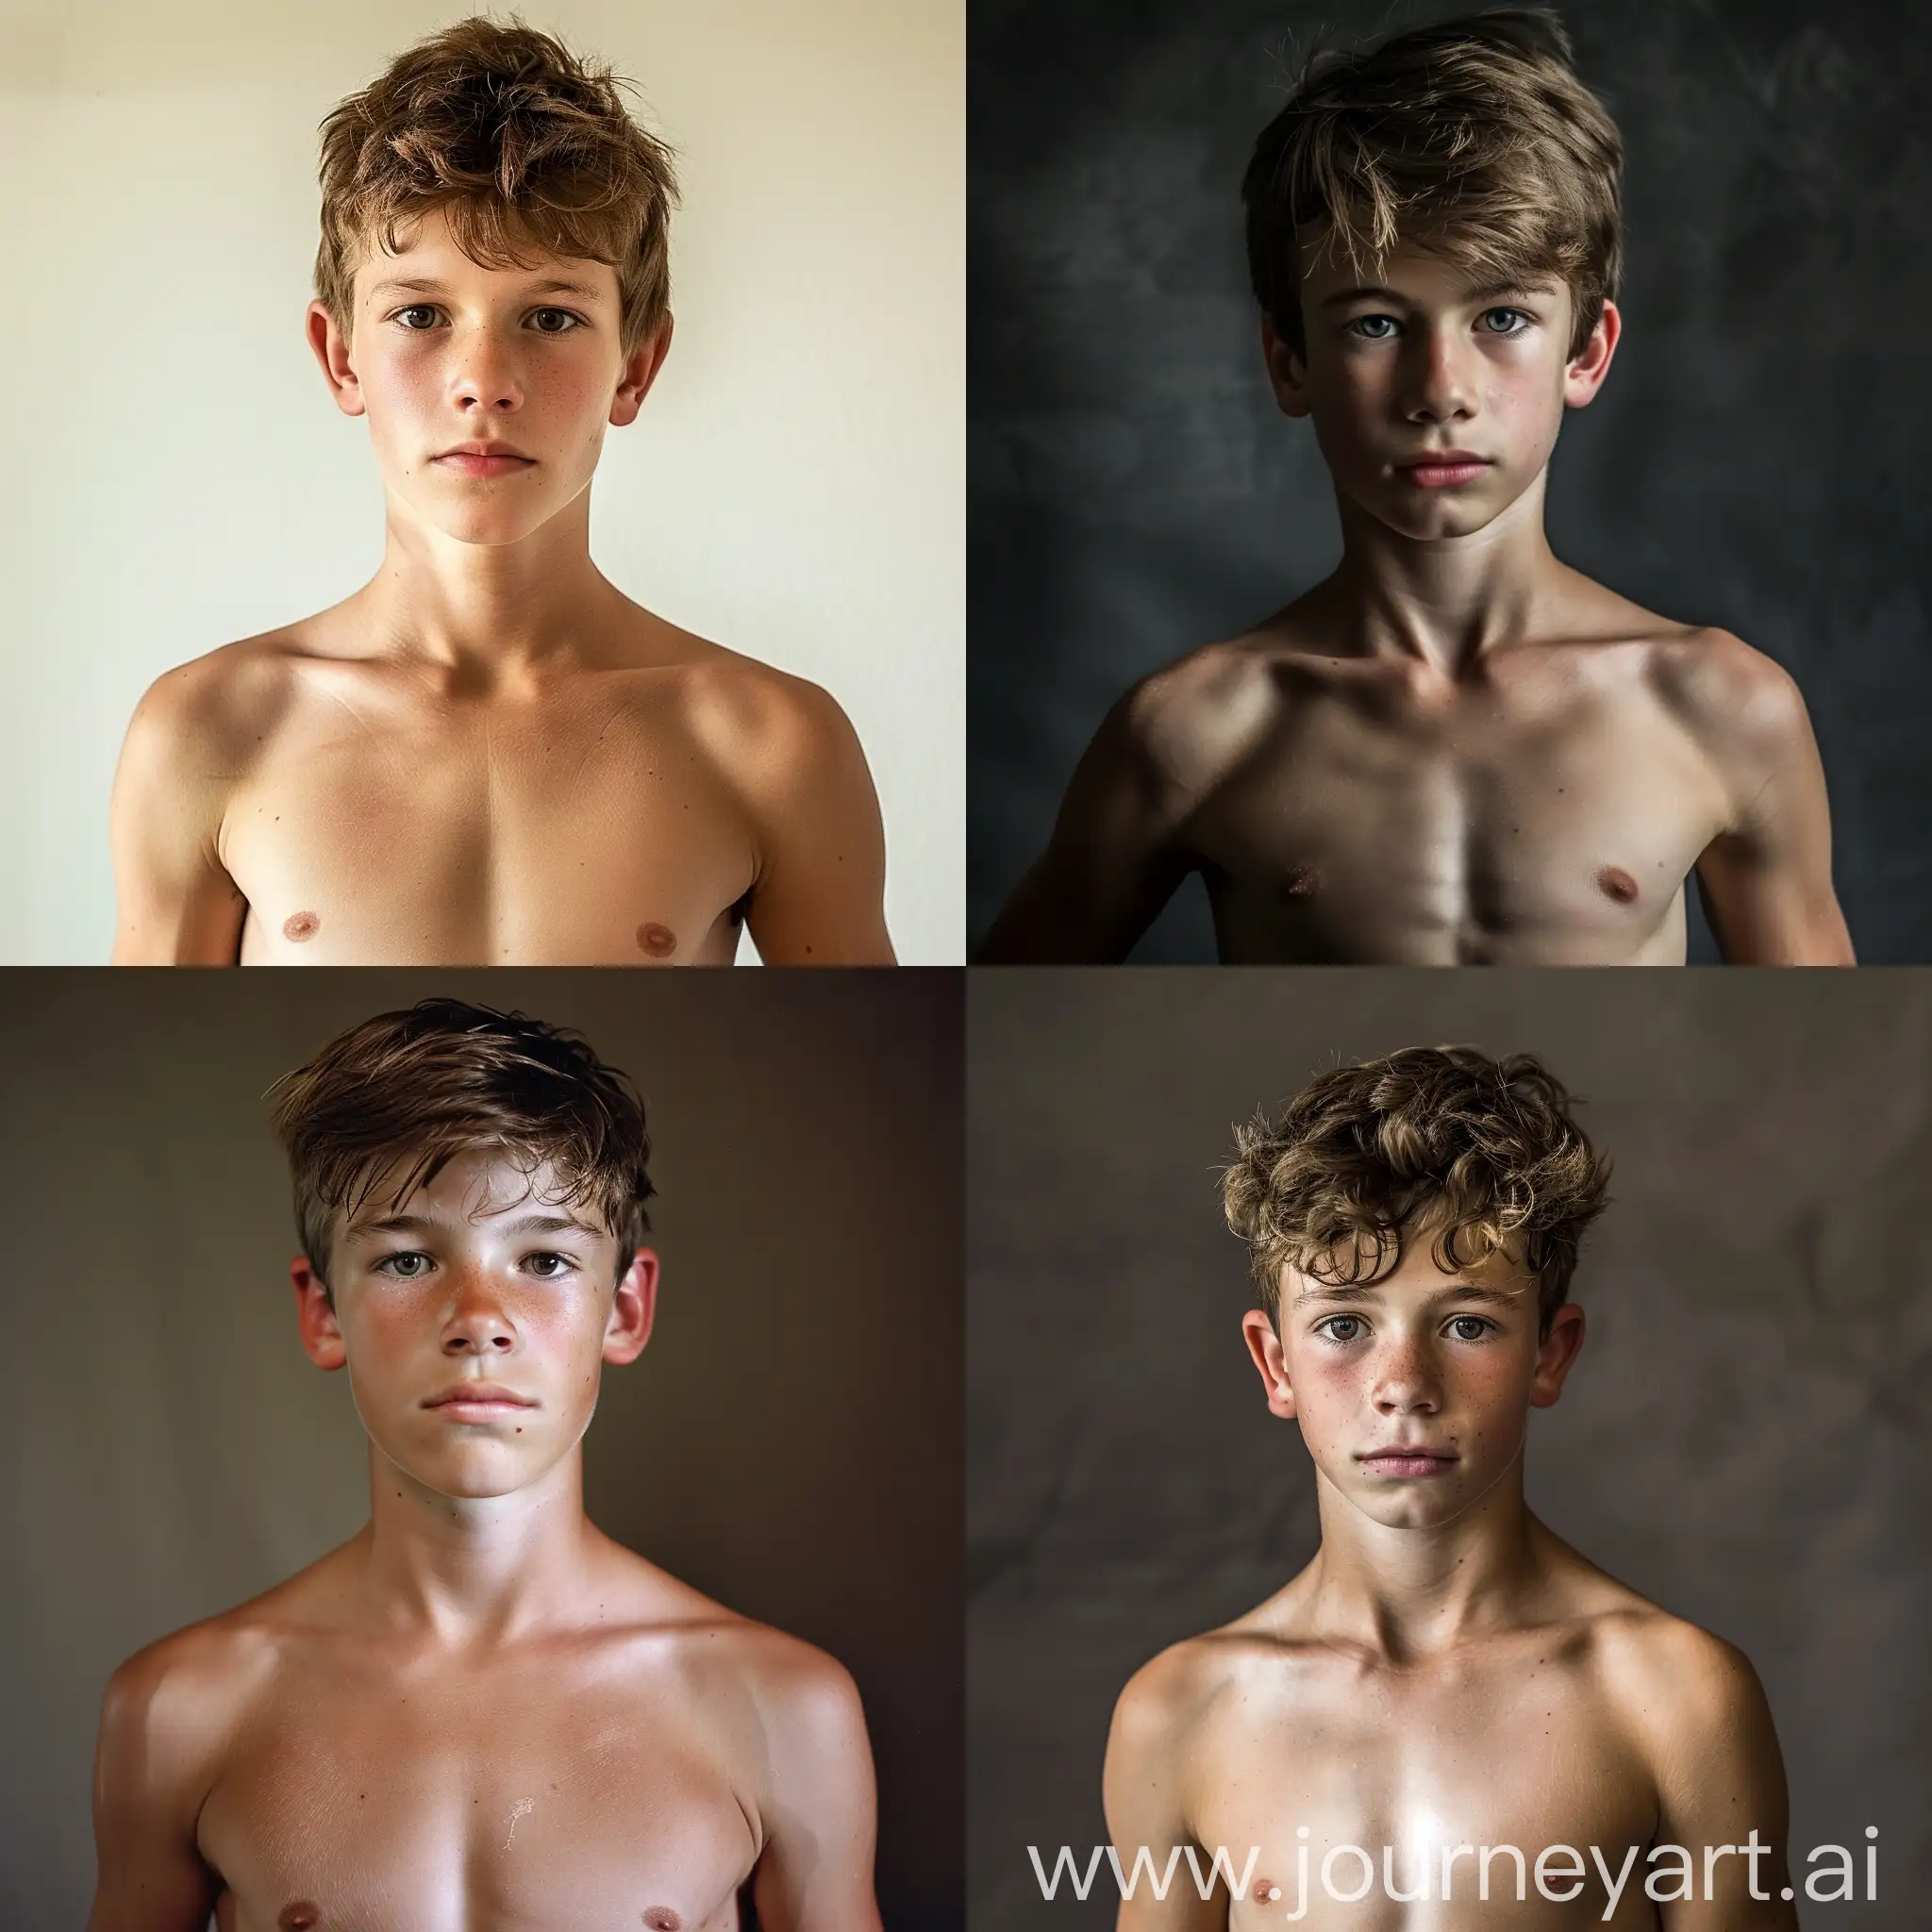 boy age 15 with sixpack